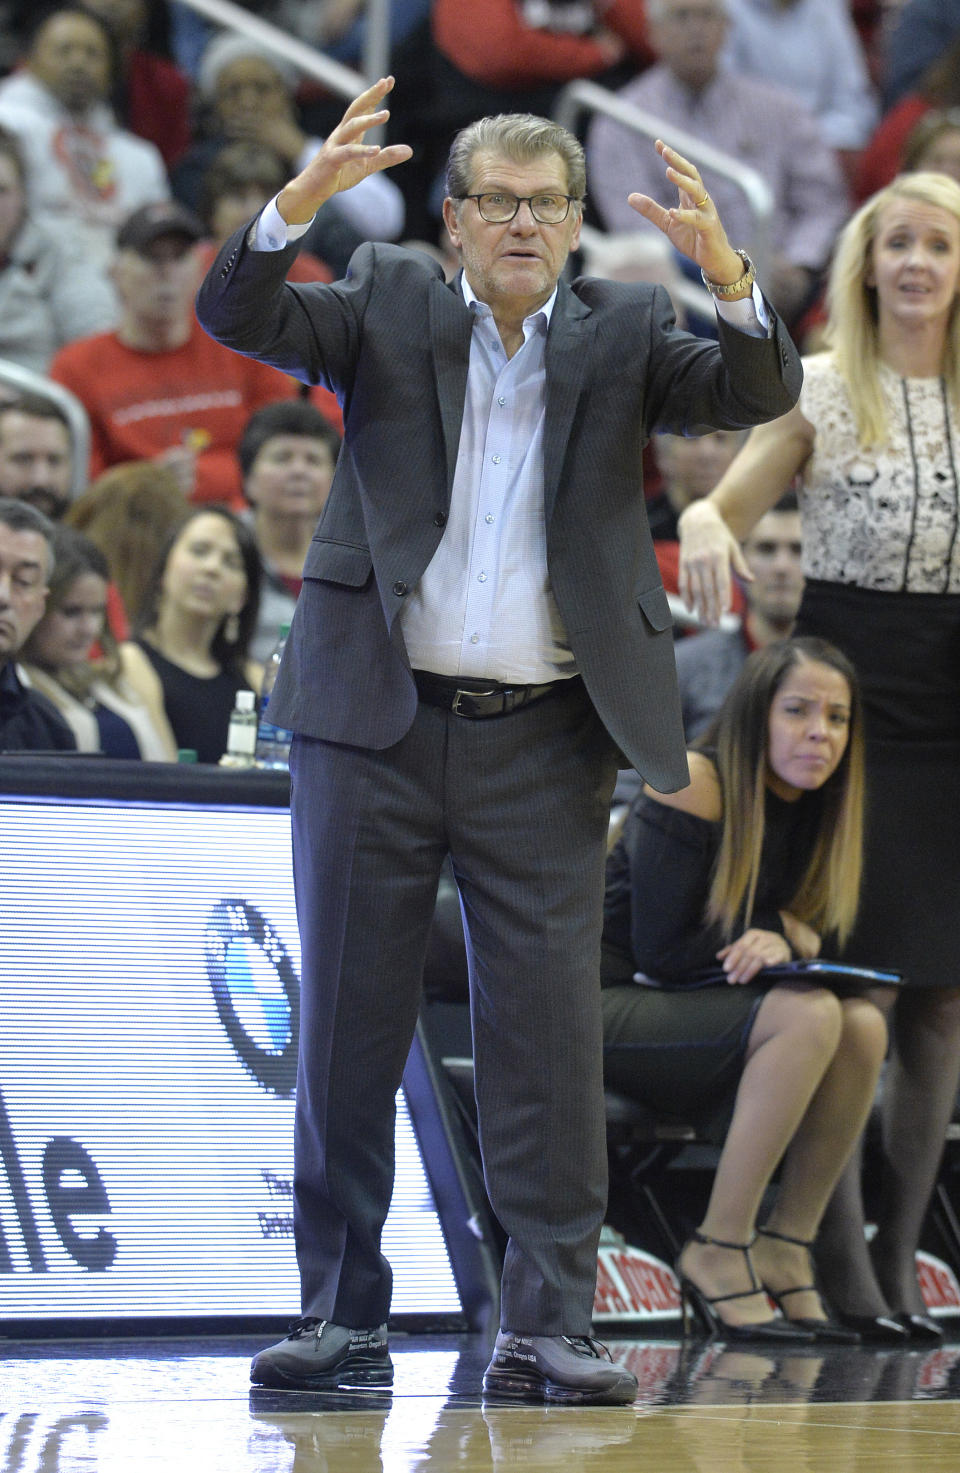 Connecticut coach Geno Auriemma sends in a play to his team during the second half of an NCAA college basketball game against Louisville in Louisville, Ky., Thursday, Jan. 31, 2019. Louisville won 78-69. (AP Photo/Timothy D. Easley)